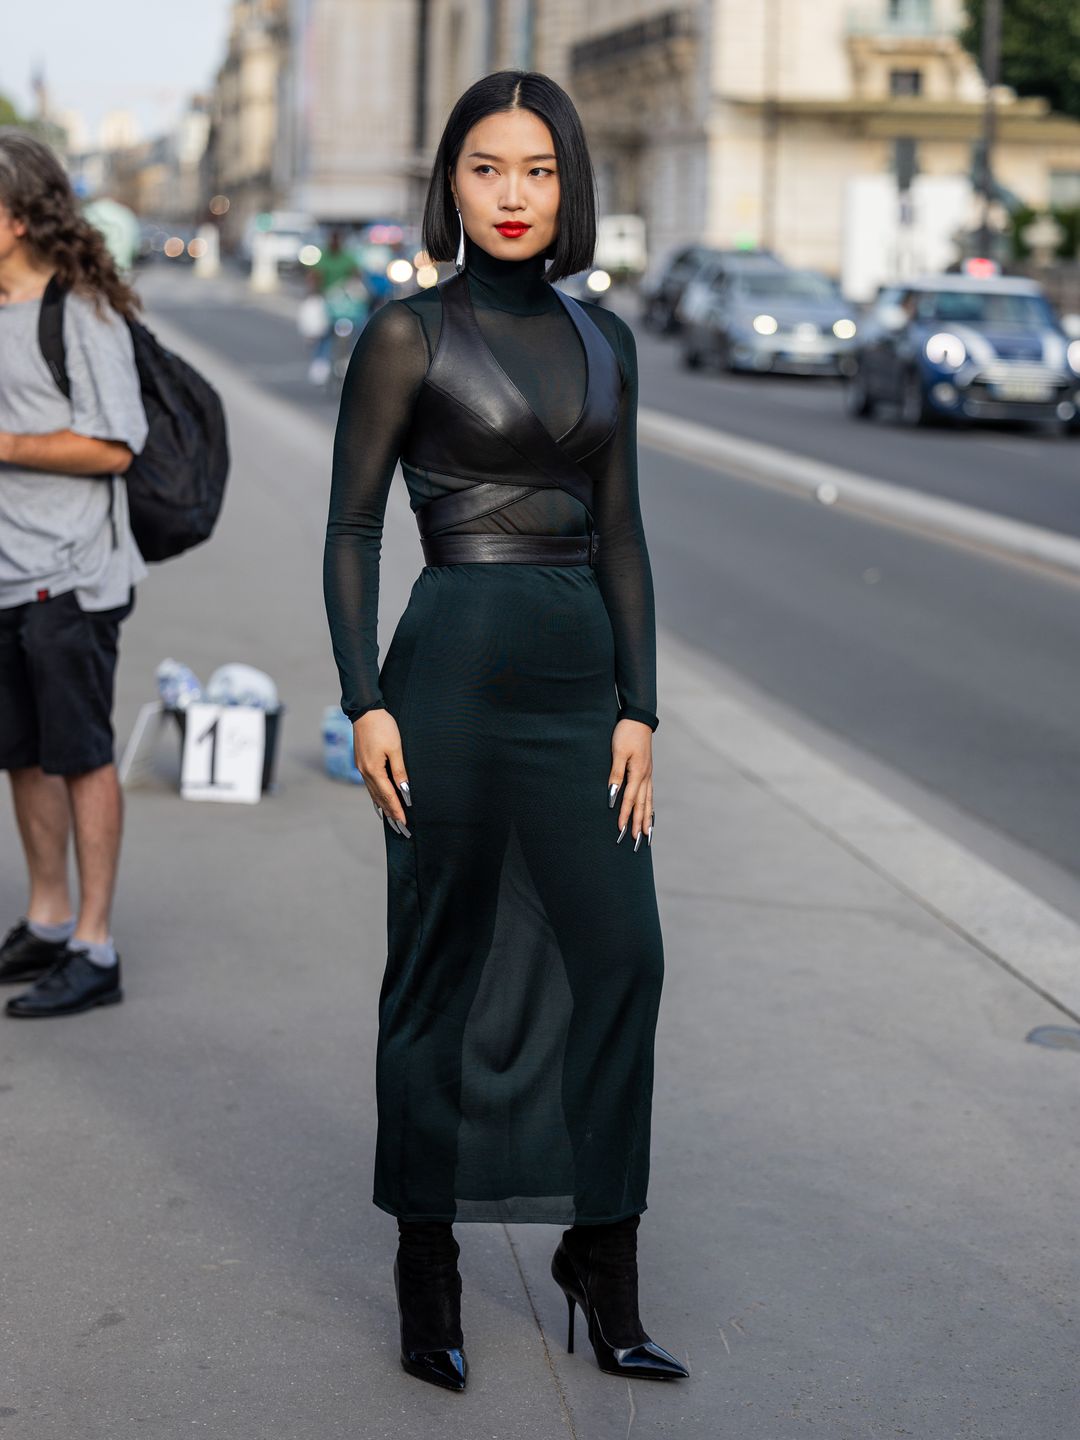 A guest wore a semi-sheer dress alongside a leather wraparound crop top.